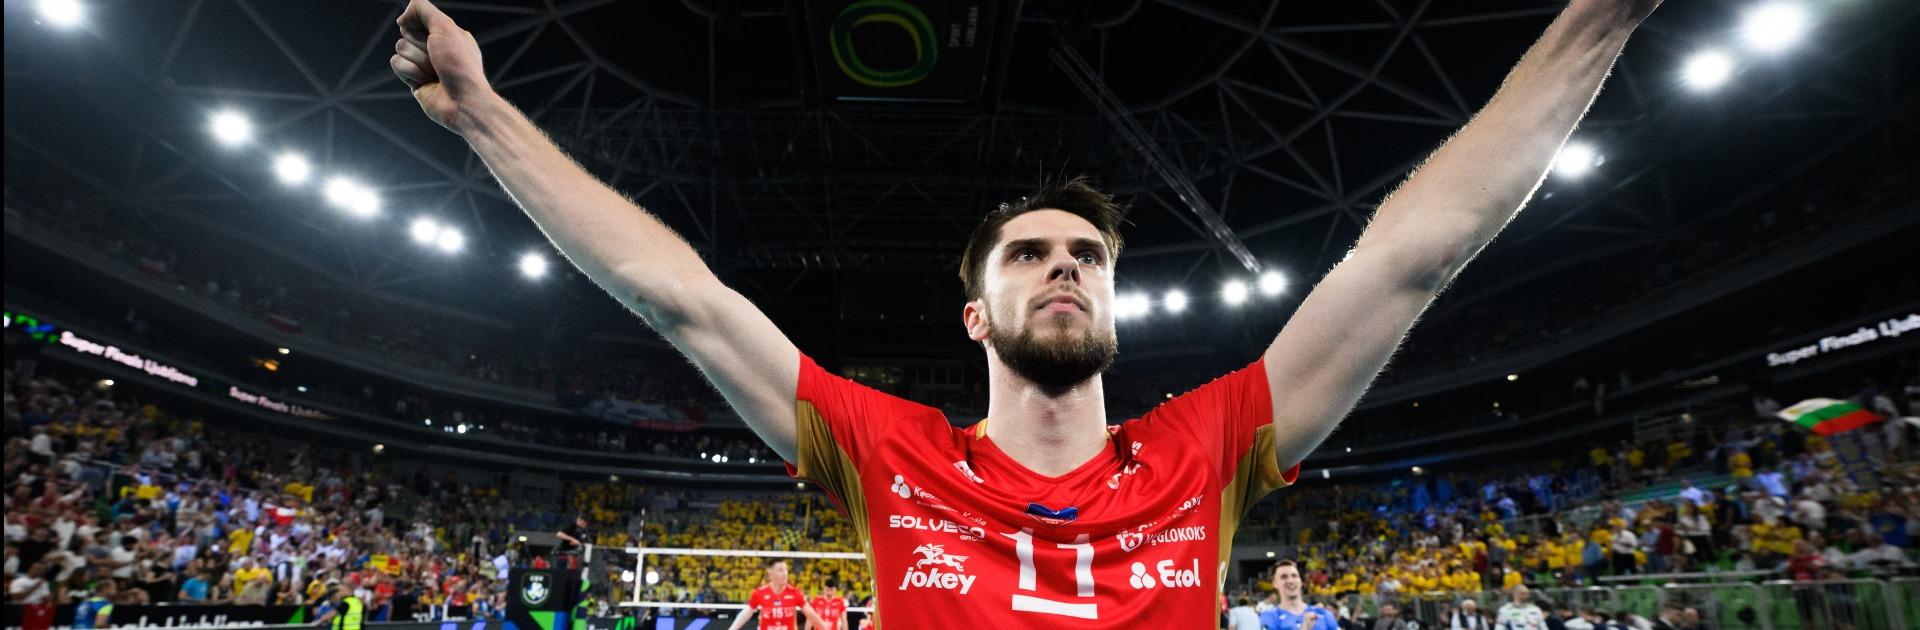 eurovolley live stream free